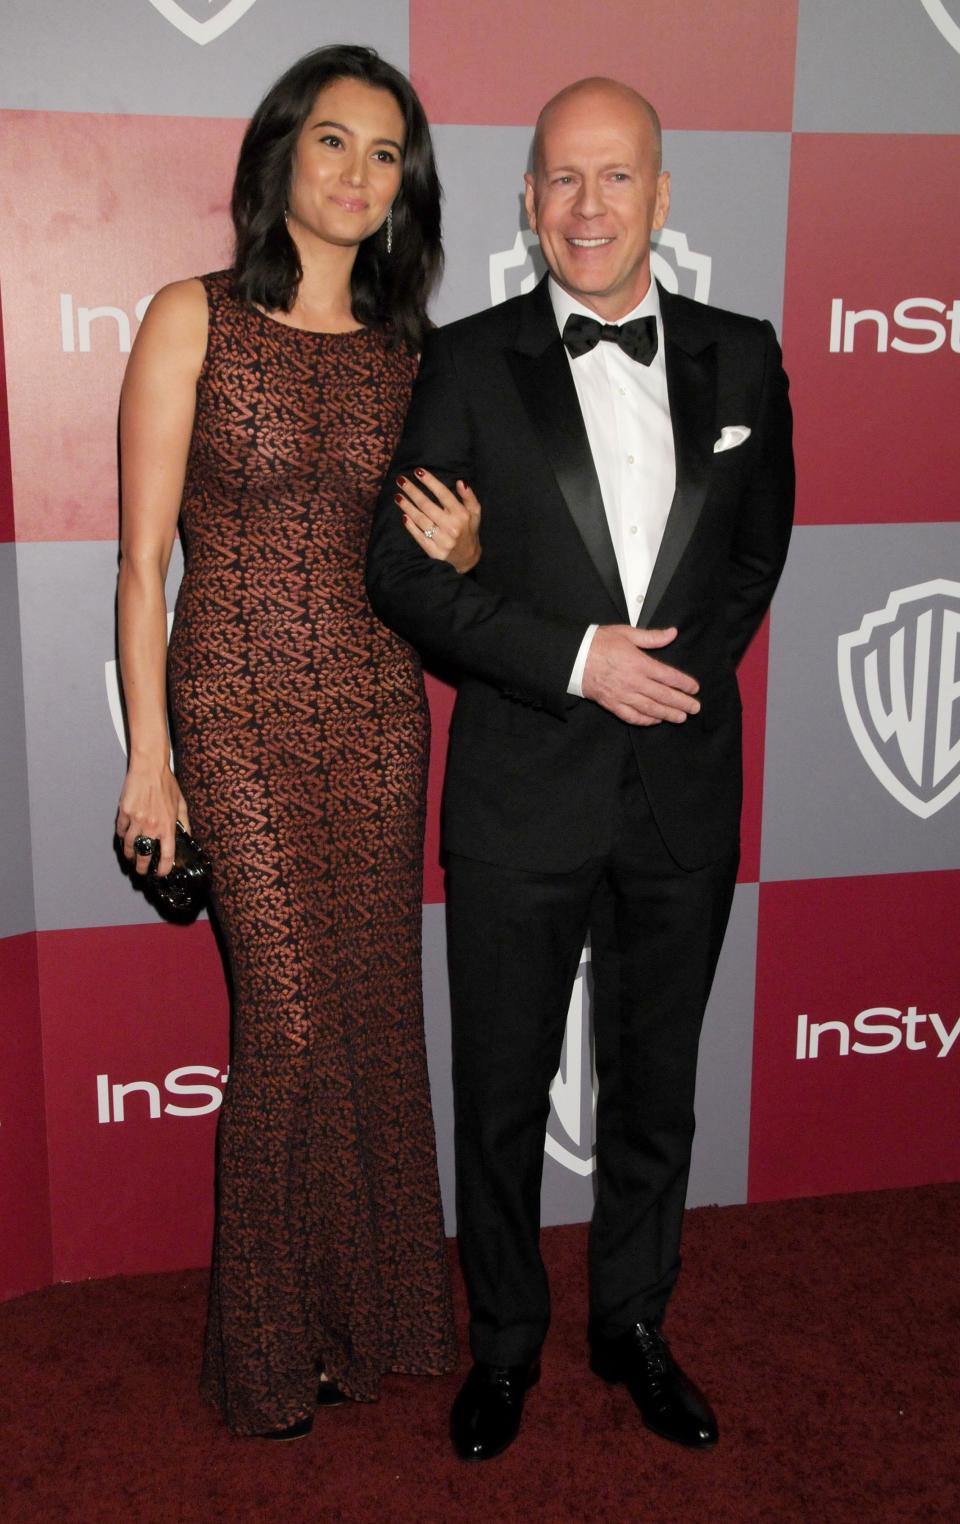 Emma Heming Willis on the red carpet with her husband Bruce Willis. (Photo by Gregg DeGuire/FilmMagic)